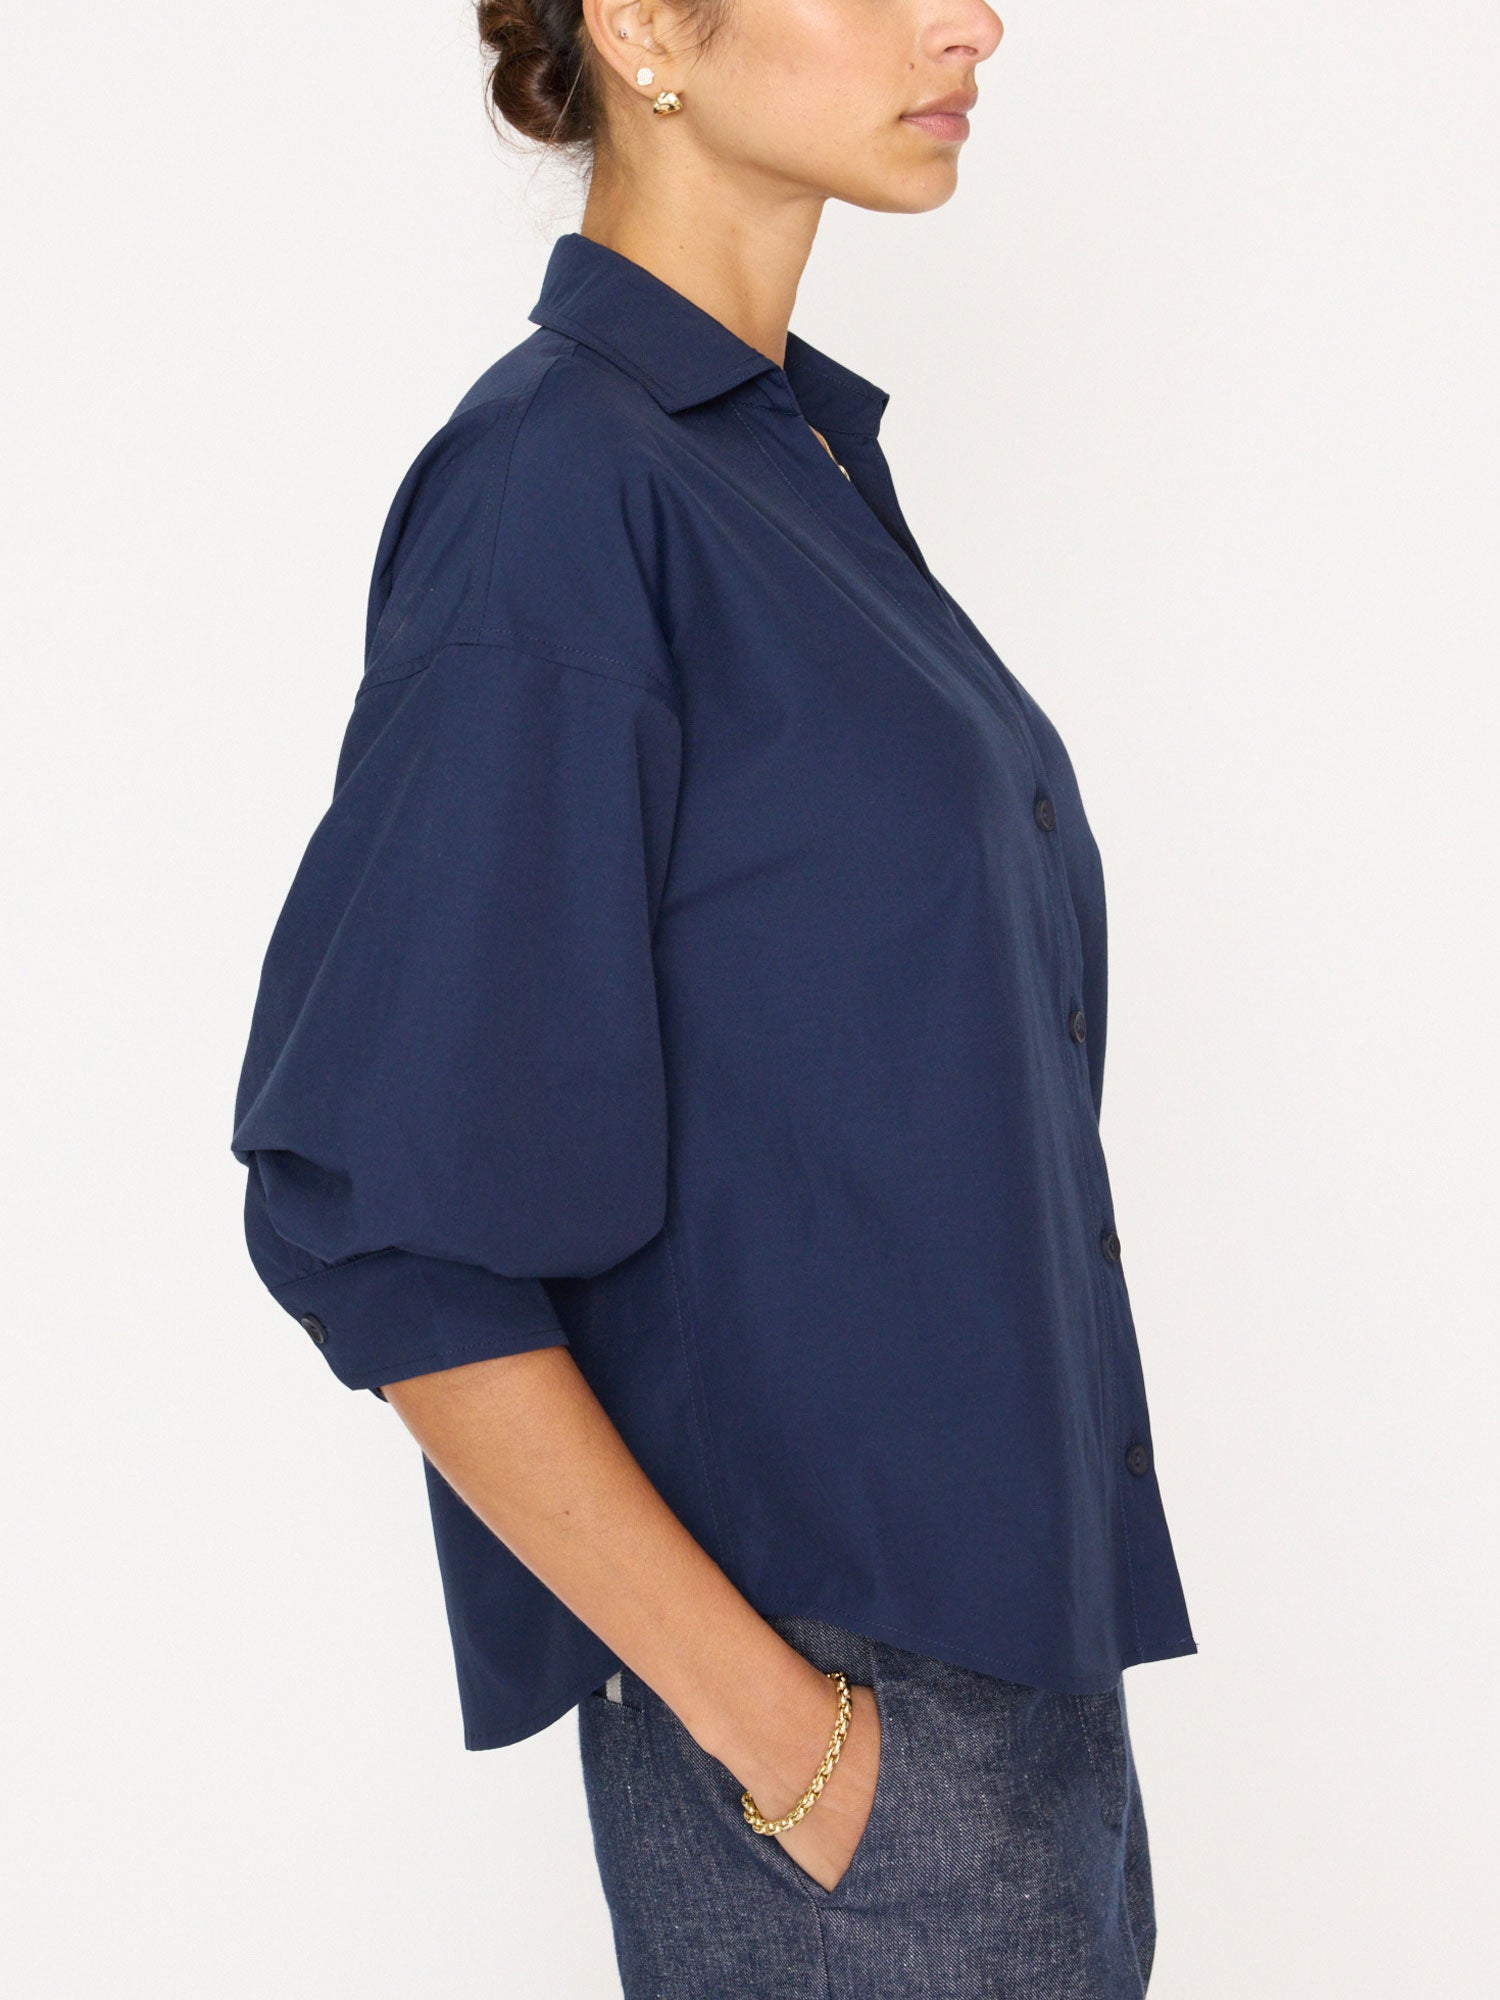 Kate V-neck button up navy shirt side view